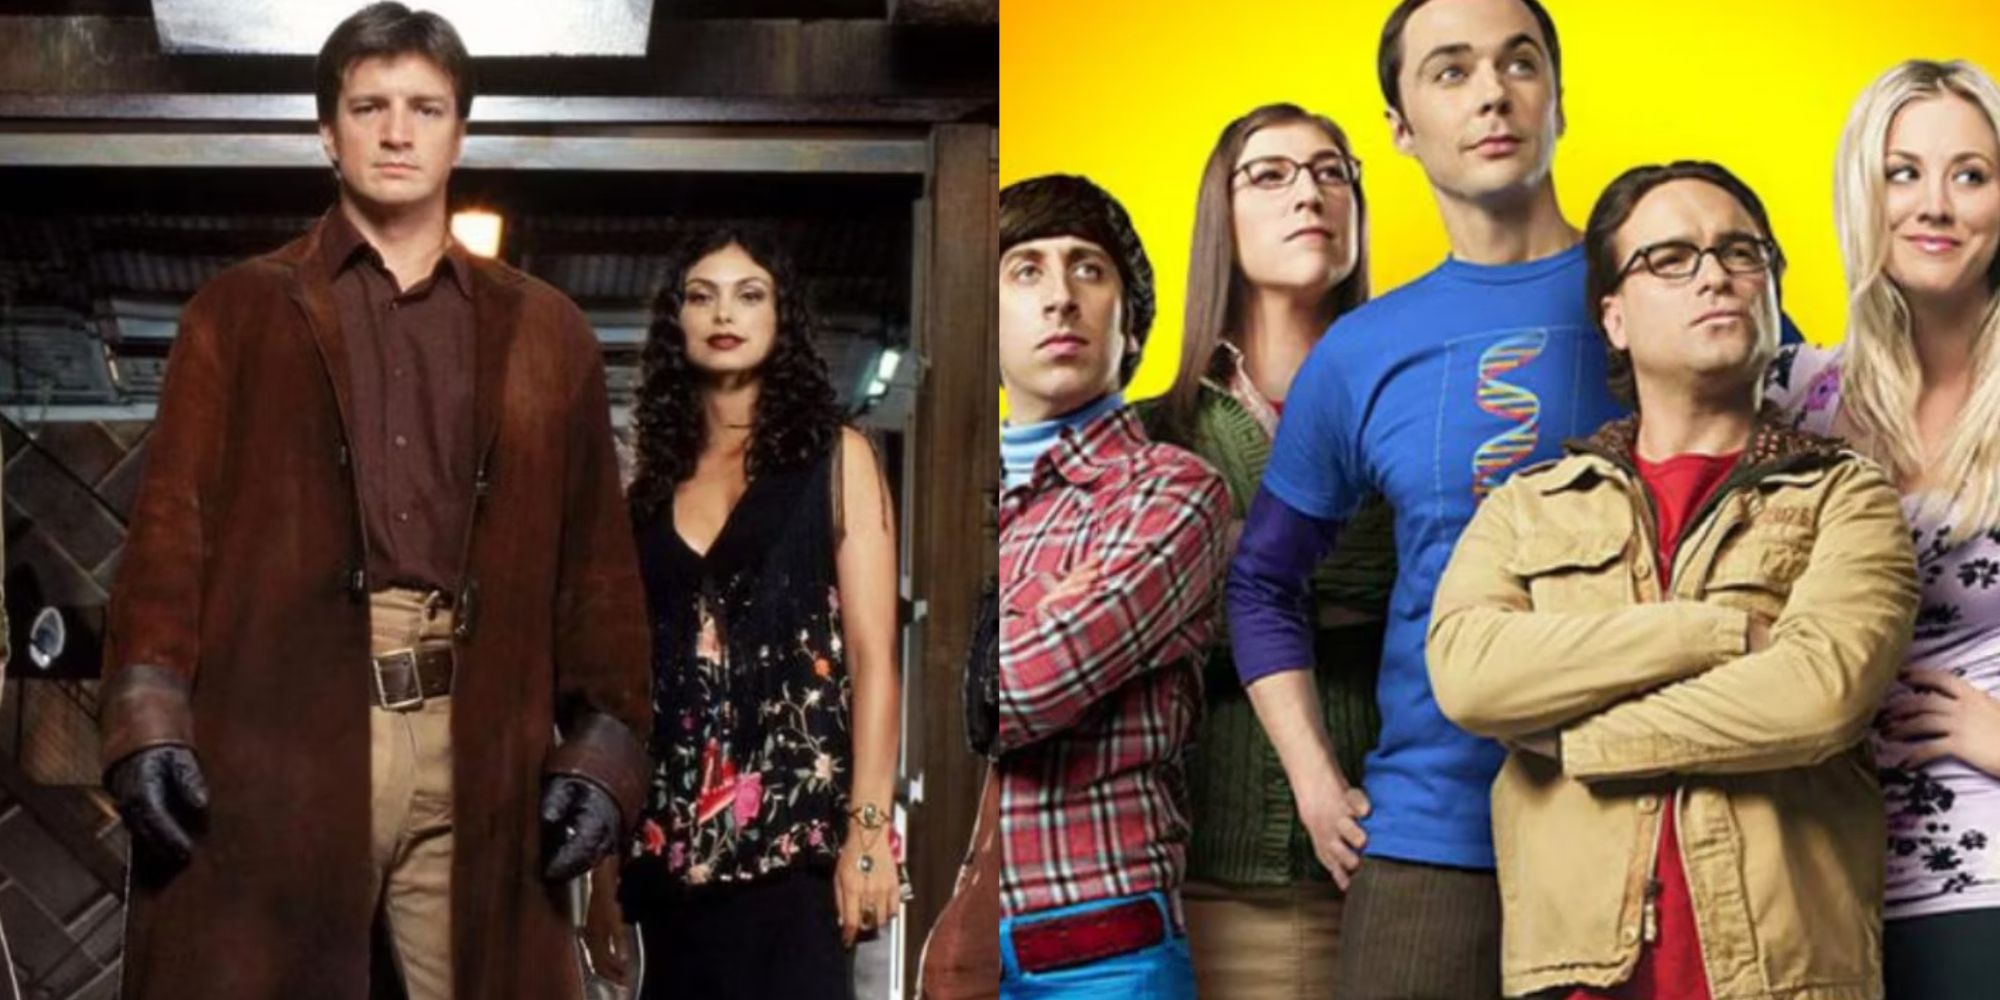 10 Worst TV Theme Songs Of All Time, According To Reddit